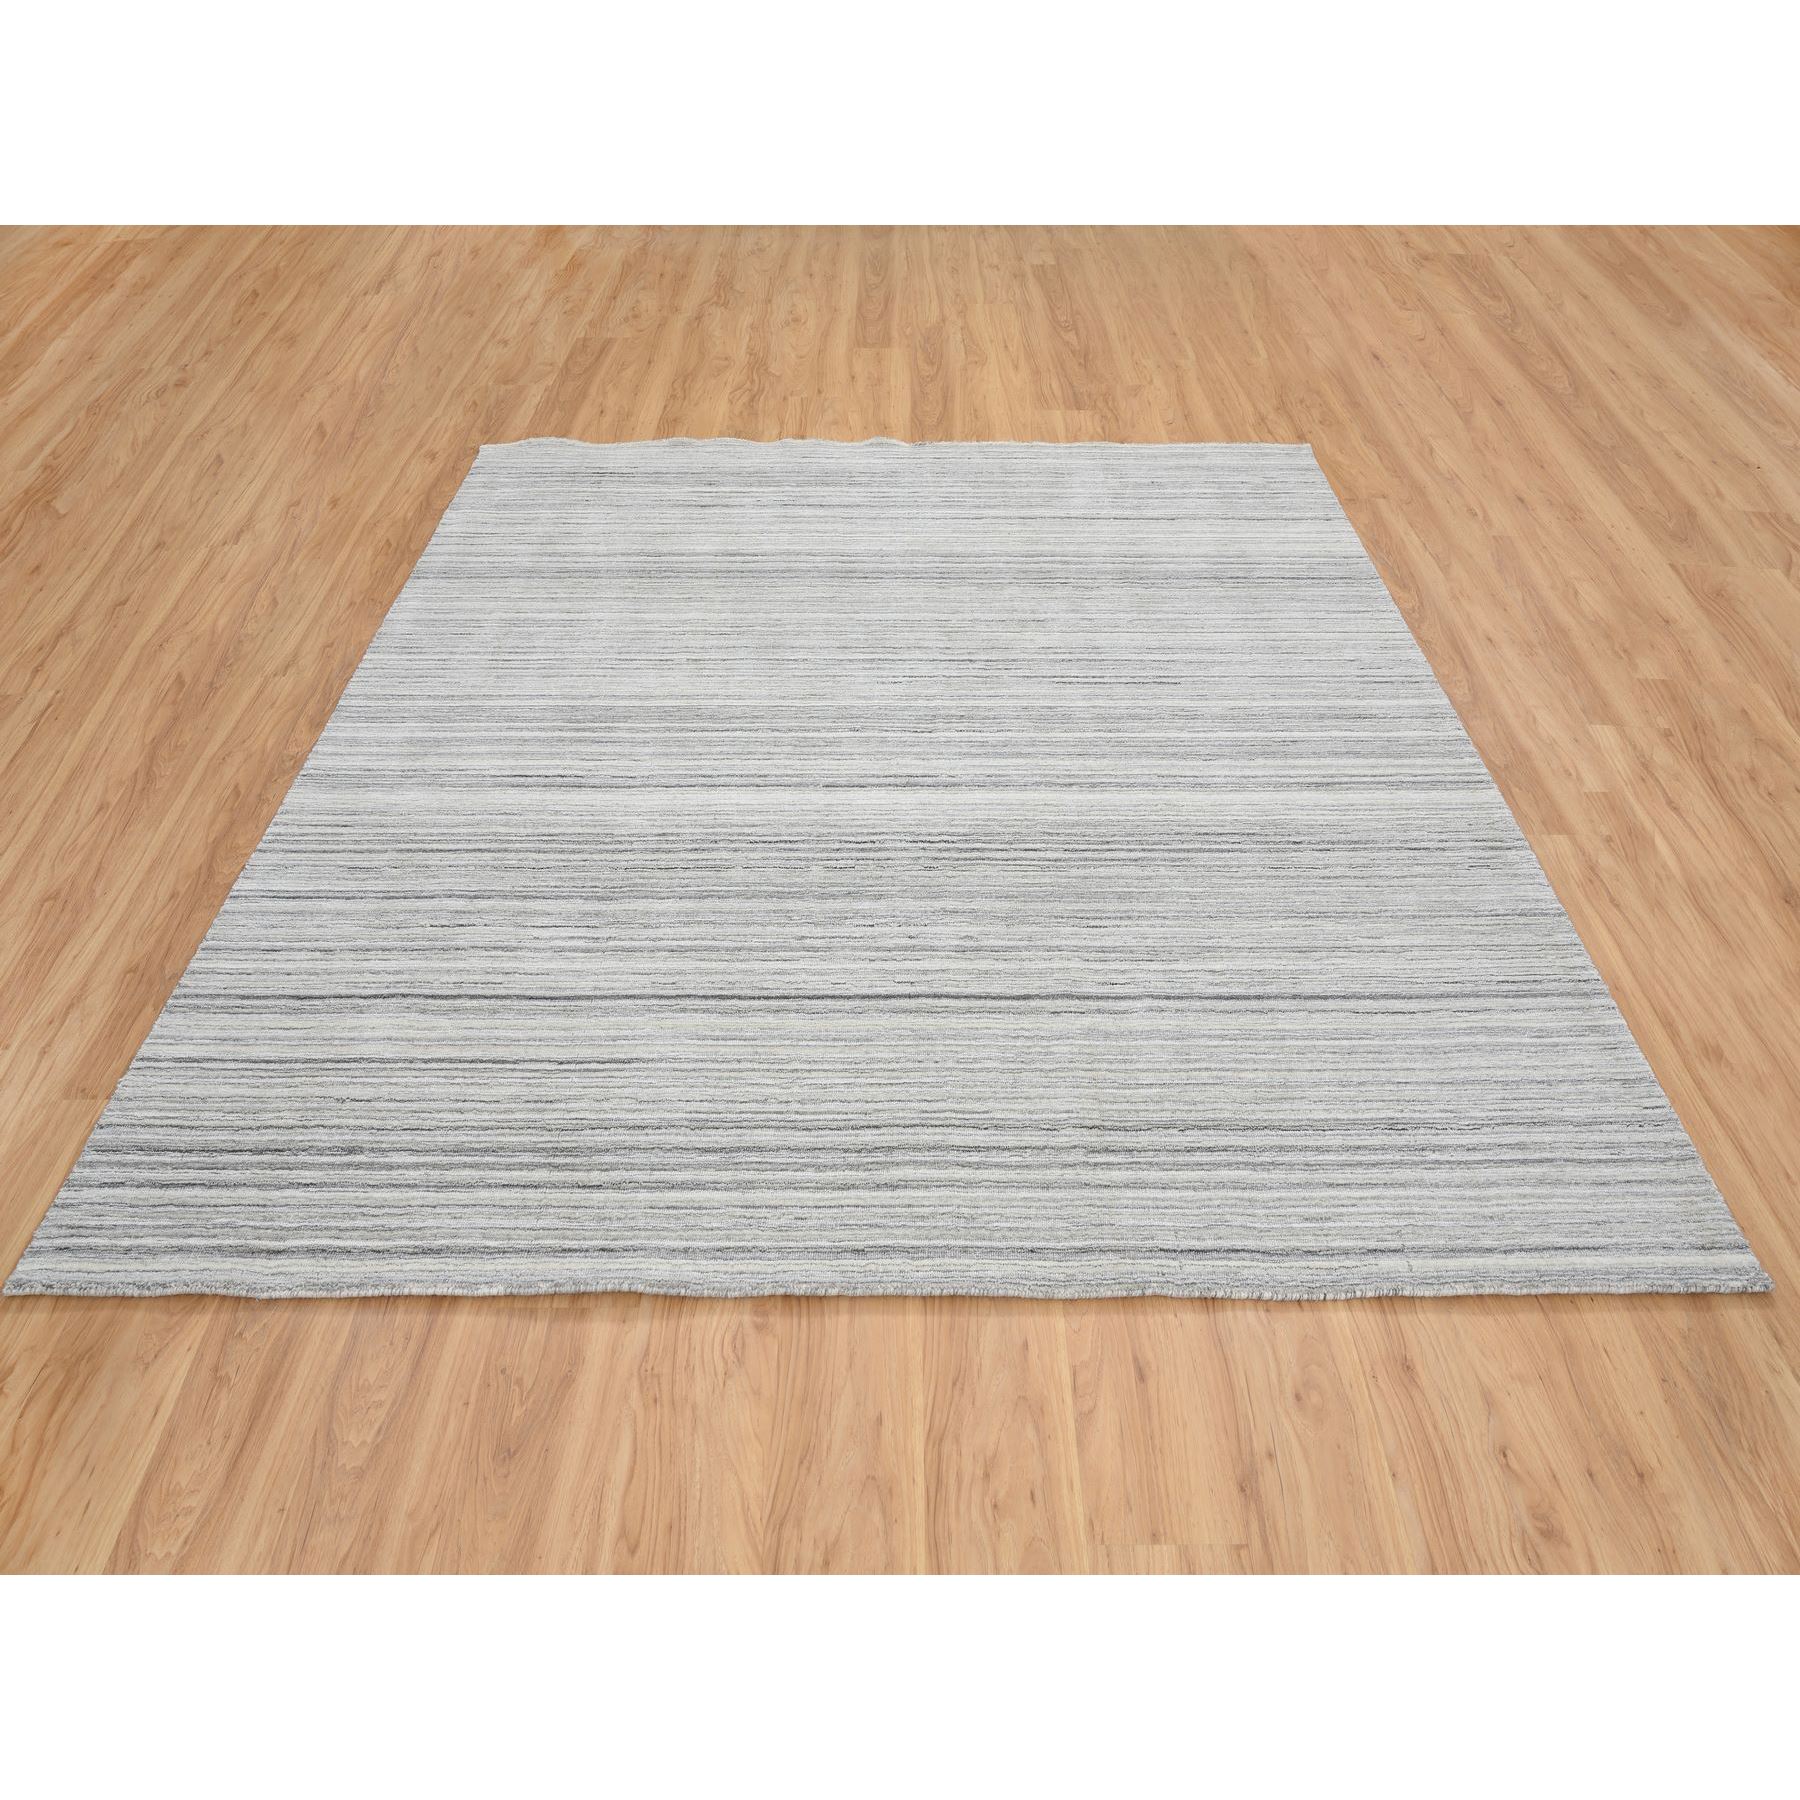 8'1"x8'1" Platinum Gray and Cream, Plain Hand Loomed Undyed Natural Wool, Modern Design Thick and Plush, Square Oriental Rug 